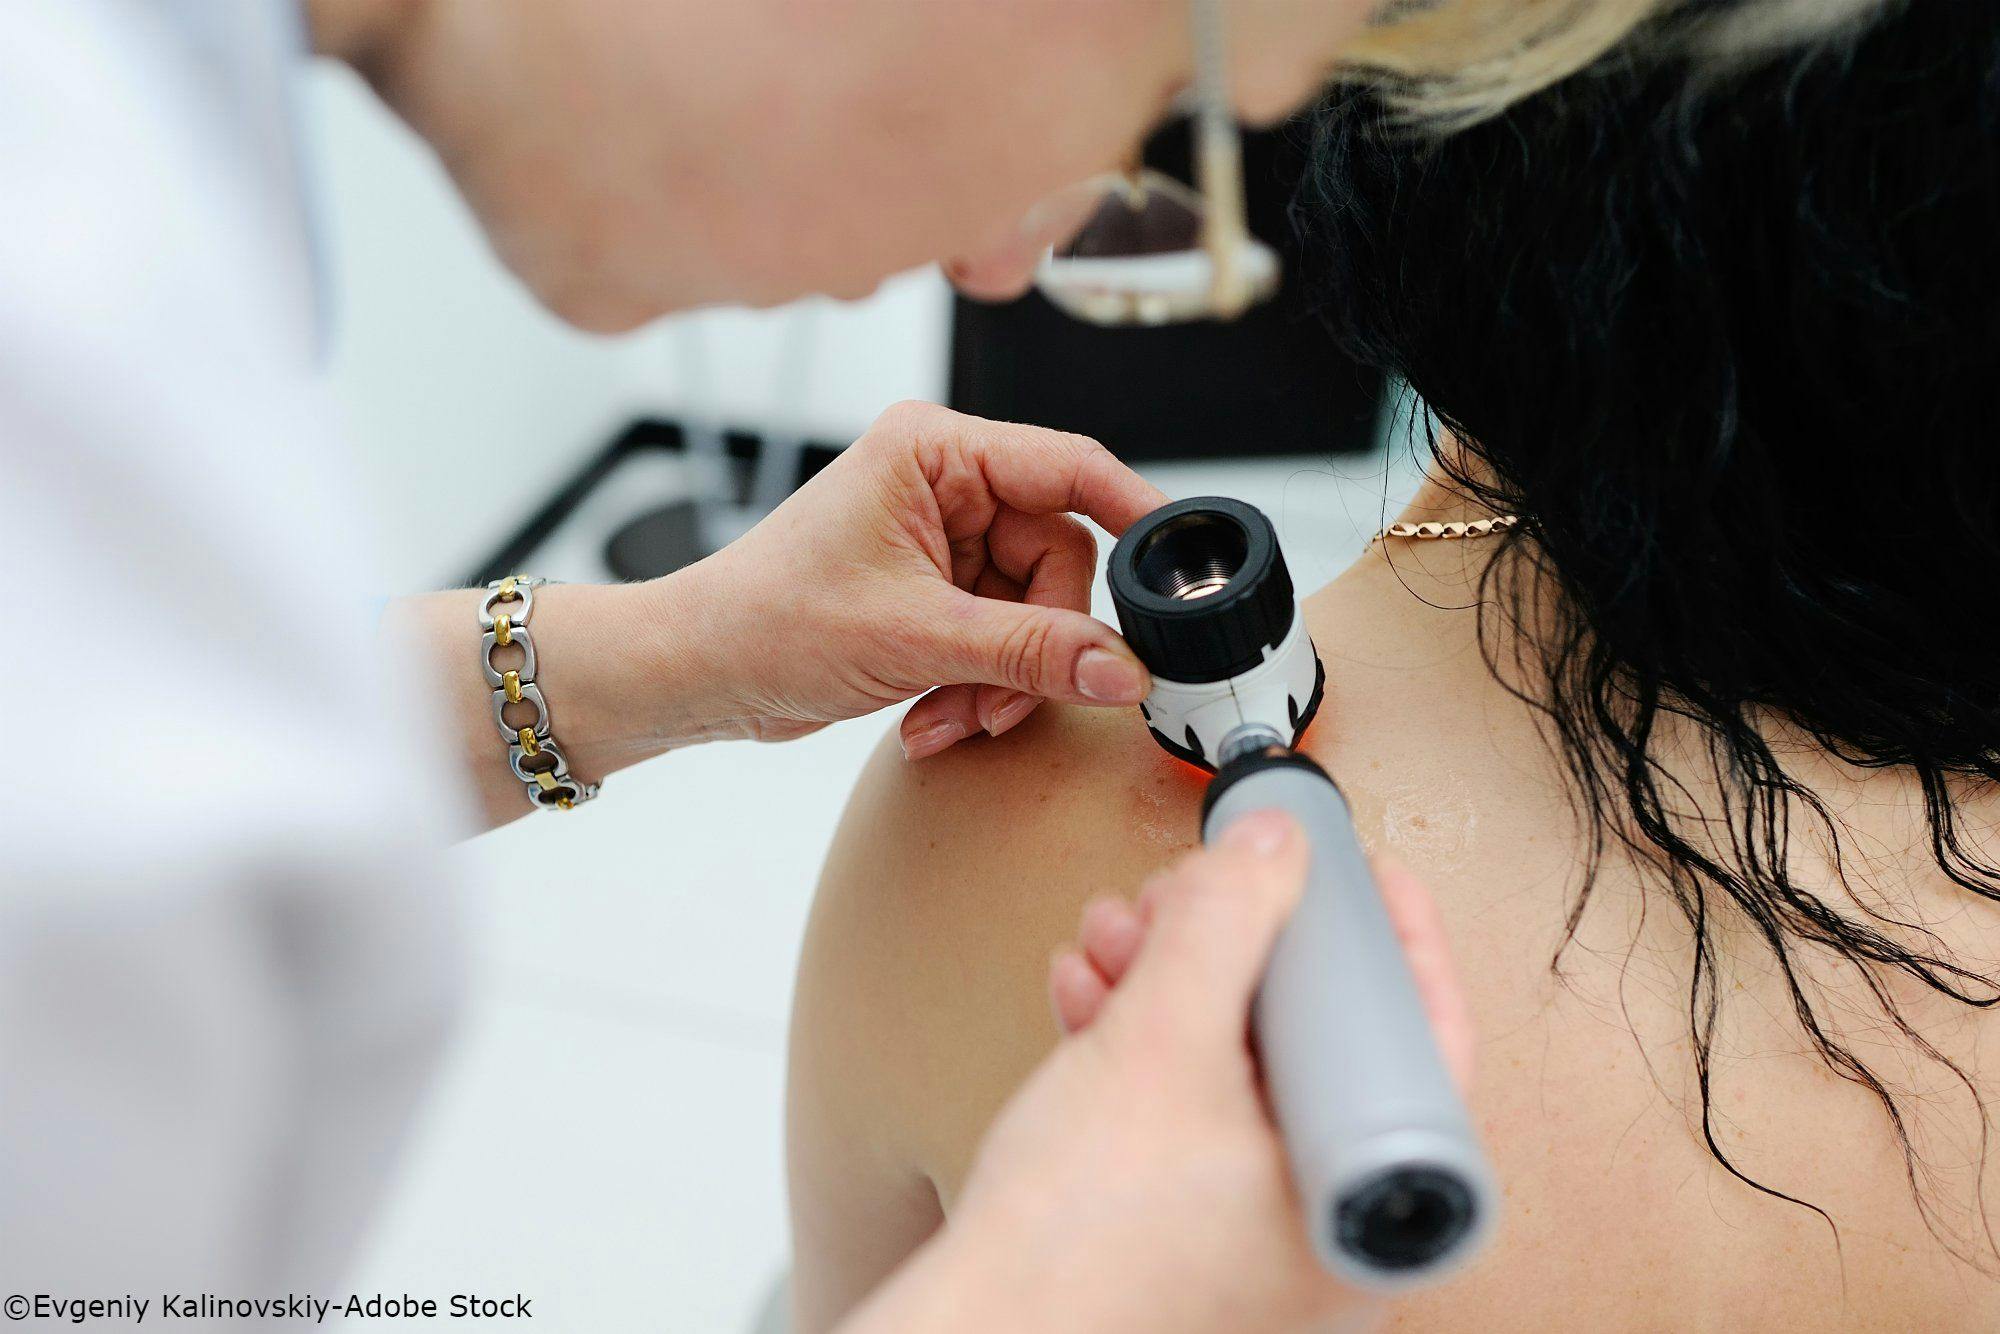 New Guidelines for Early-Stage Melanoma Treatment